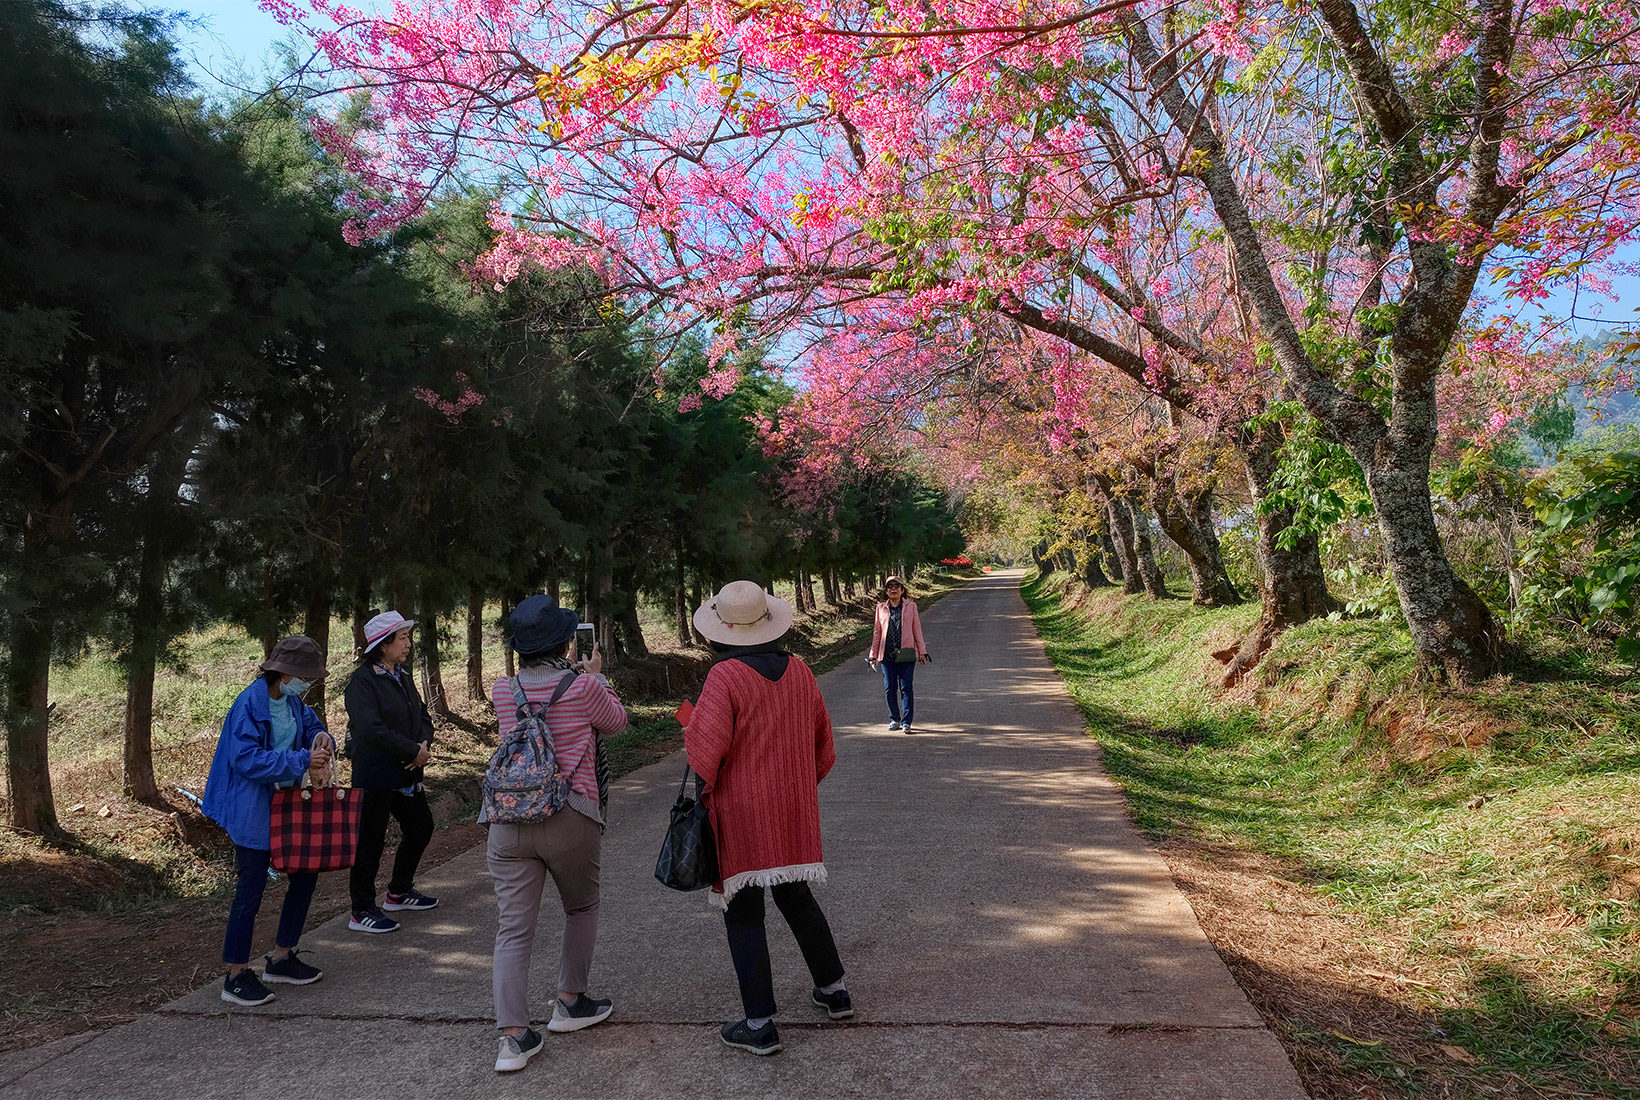 Pathway at the Royal Agricultural Research Center in Doi Inthanon National Park leads through the cherry tree blossoms